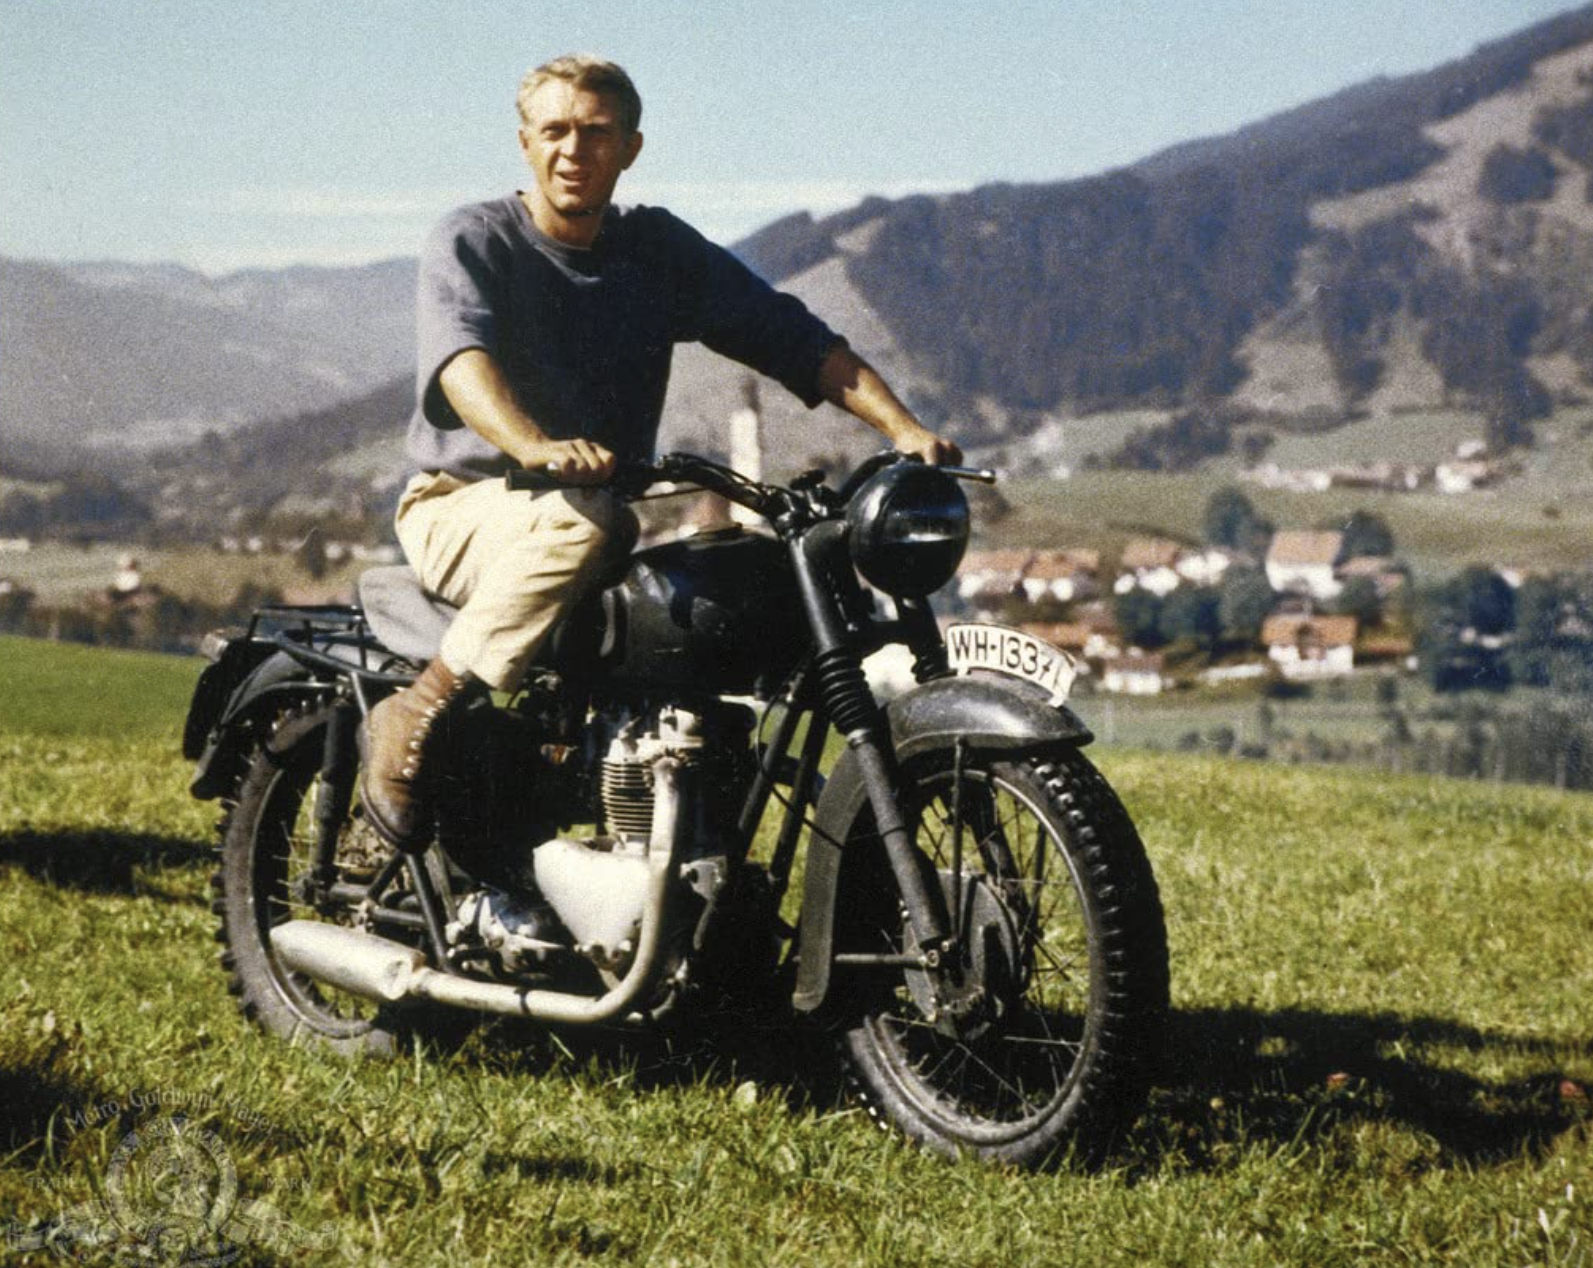 The Great Escape – How the Story of a POW Breakout Became One of Hollywood’s Most Iconic War Films